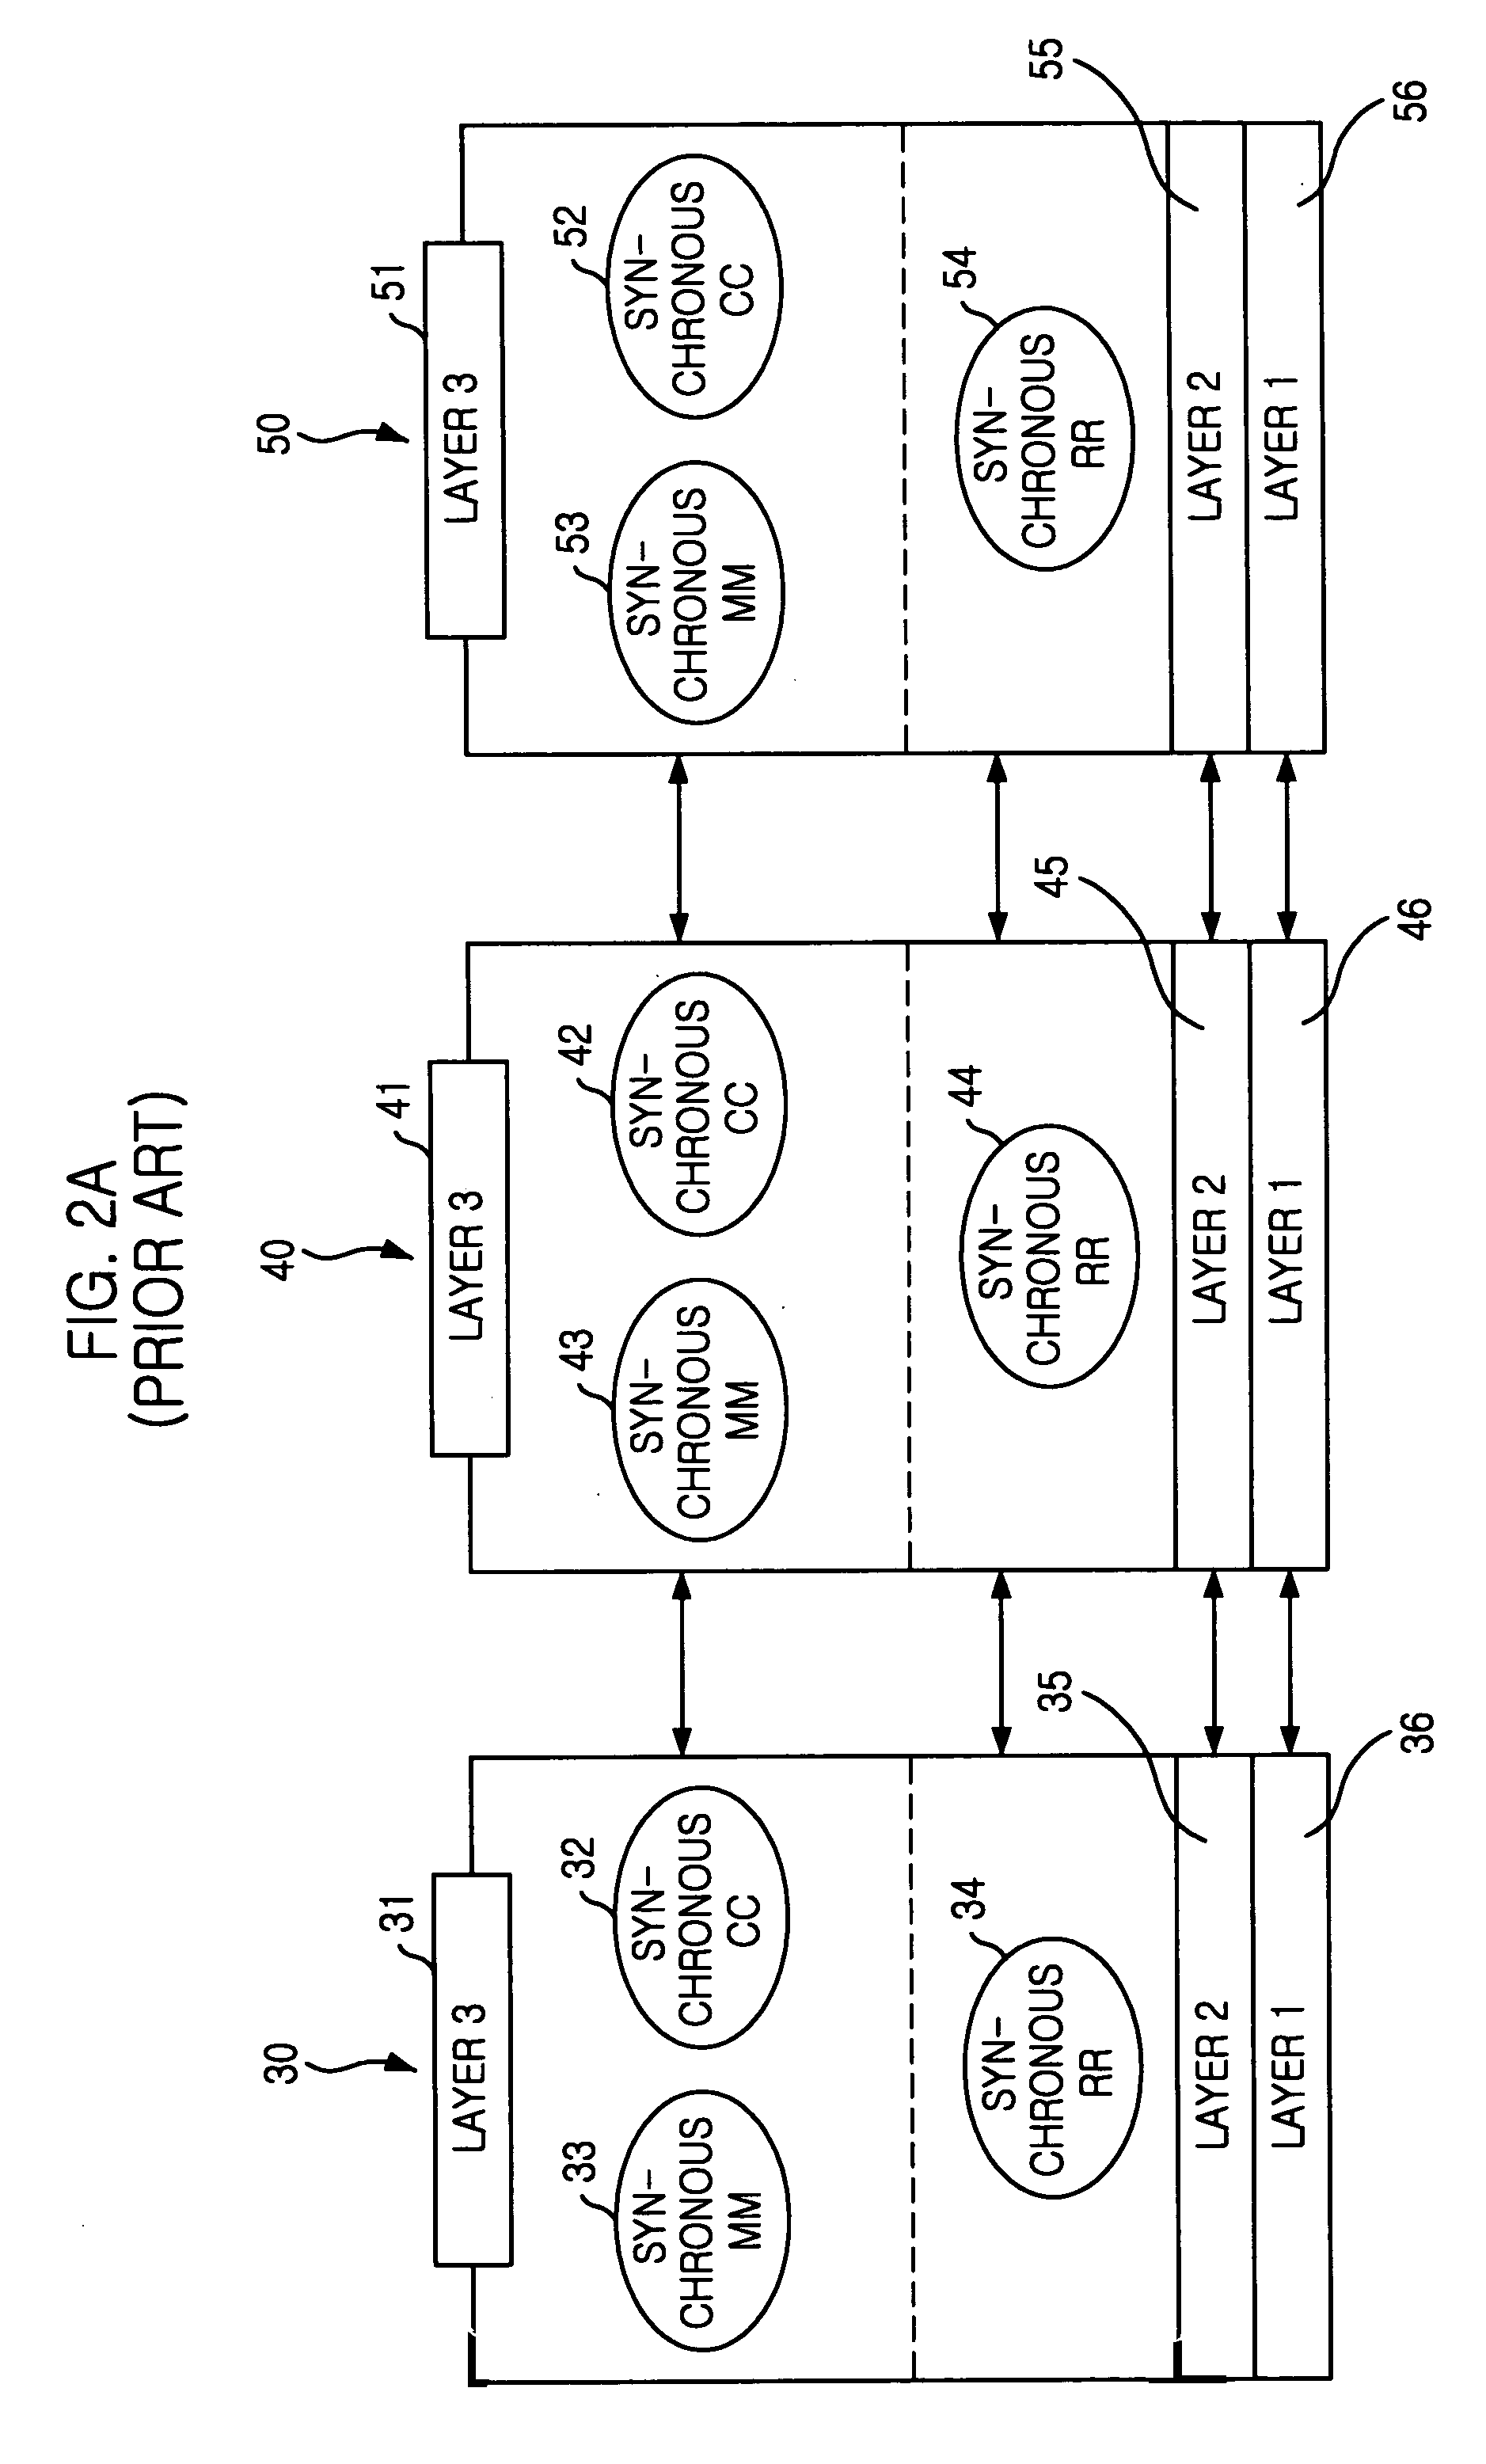 Method for interfacing asynchronous mobile communication system with at least one core network